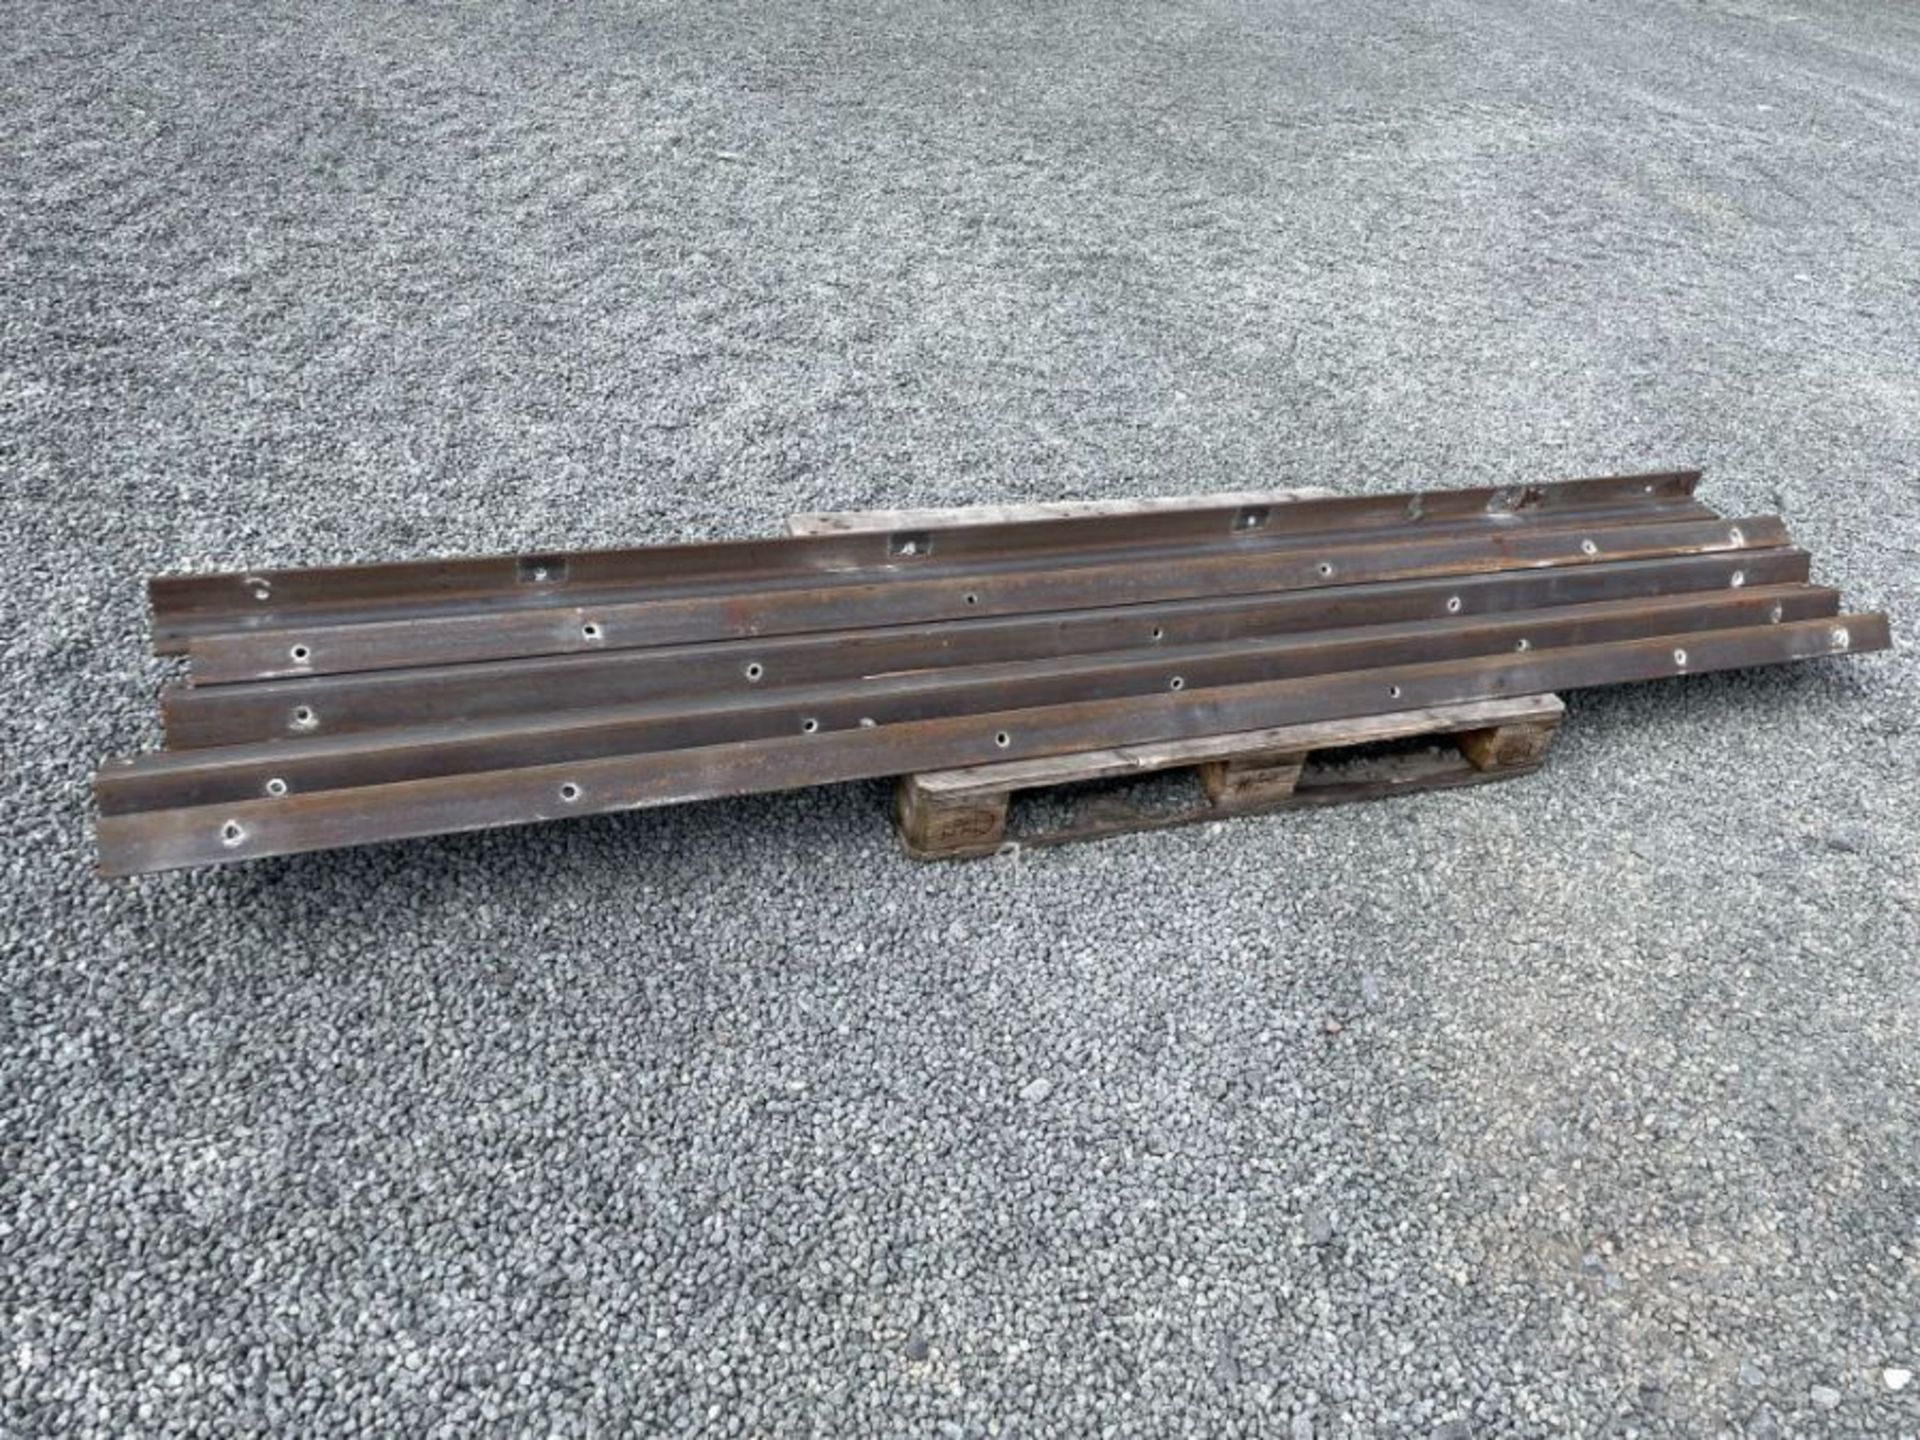 5 X LENGTHS OF 4 X 3” ANGLE IRON 10MM THICK (LENGTHS 118” - 121”) (HAMMER VAT ON THIS ITEM) - Image 2 of 4